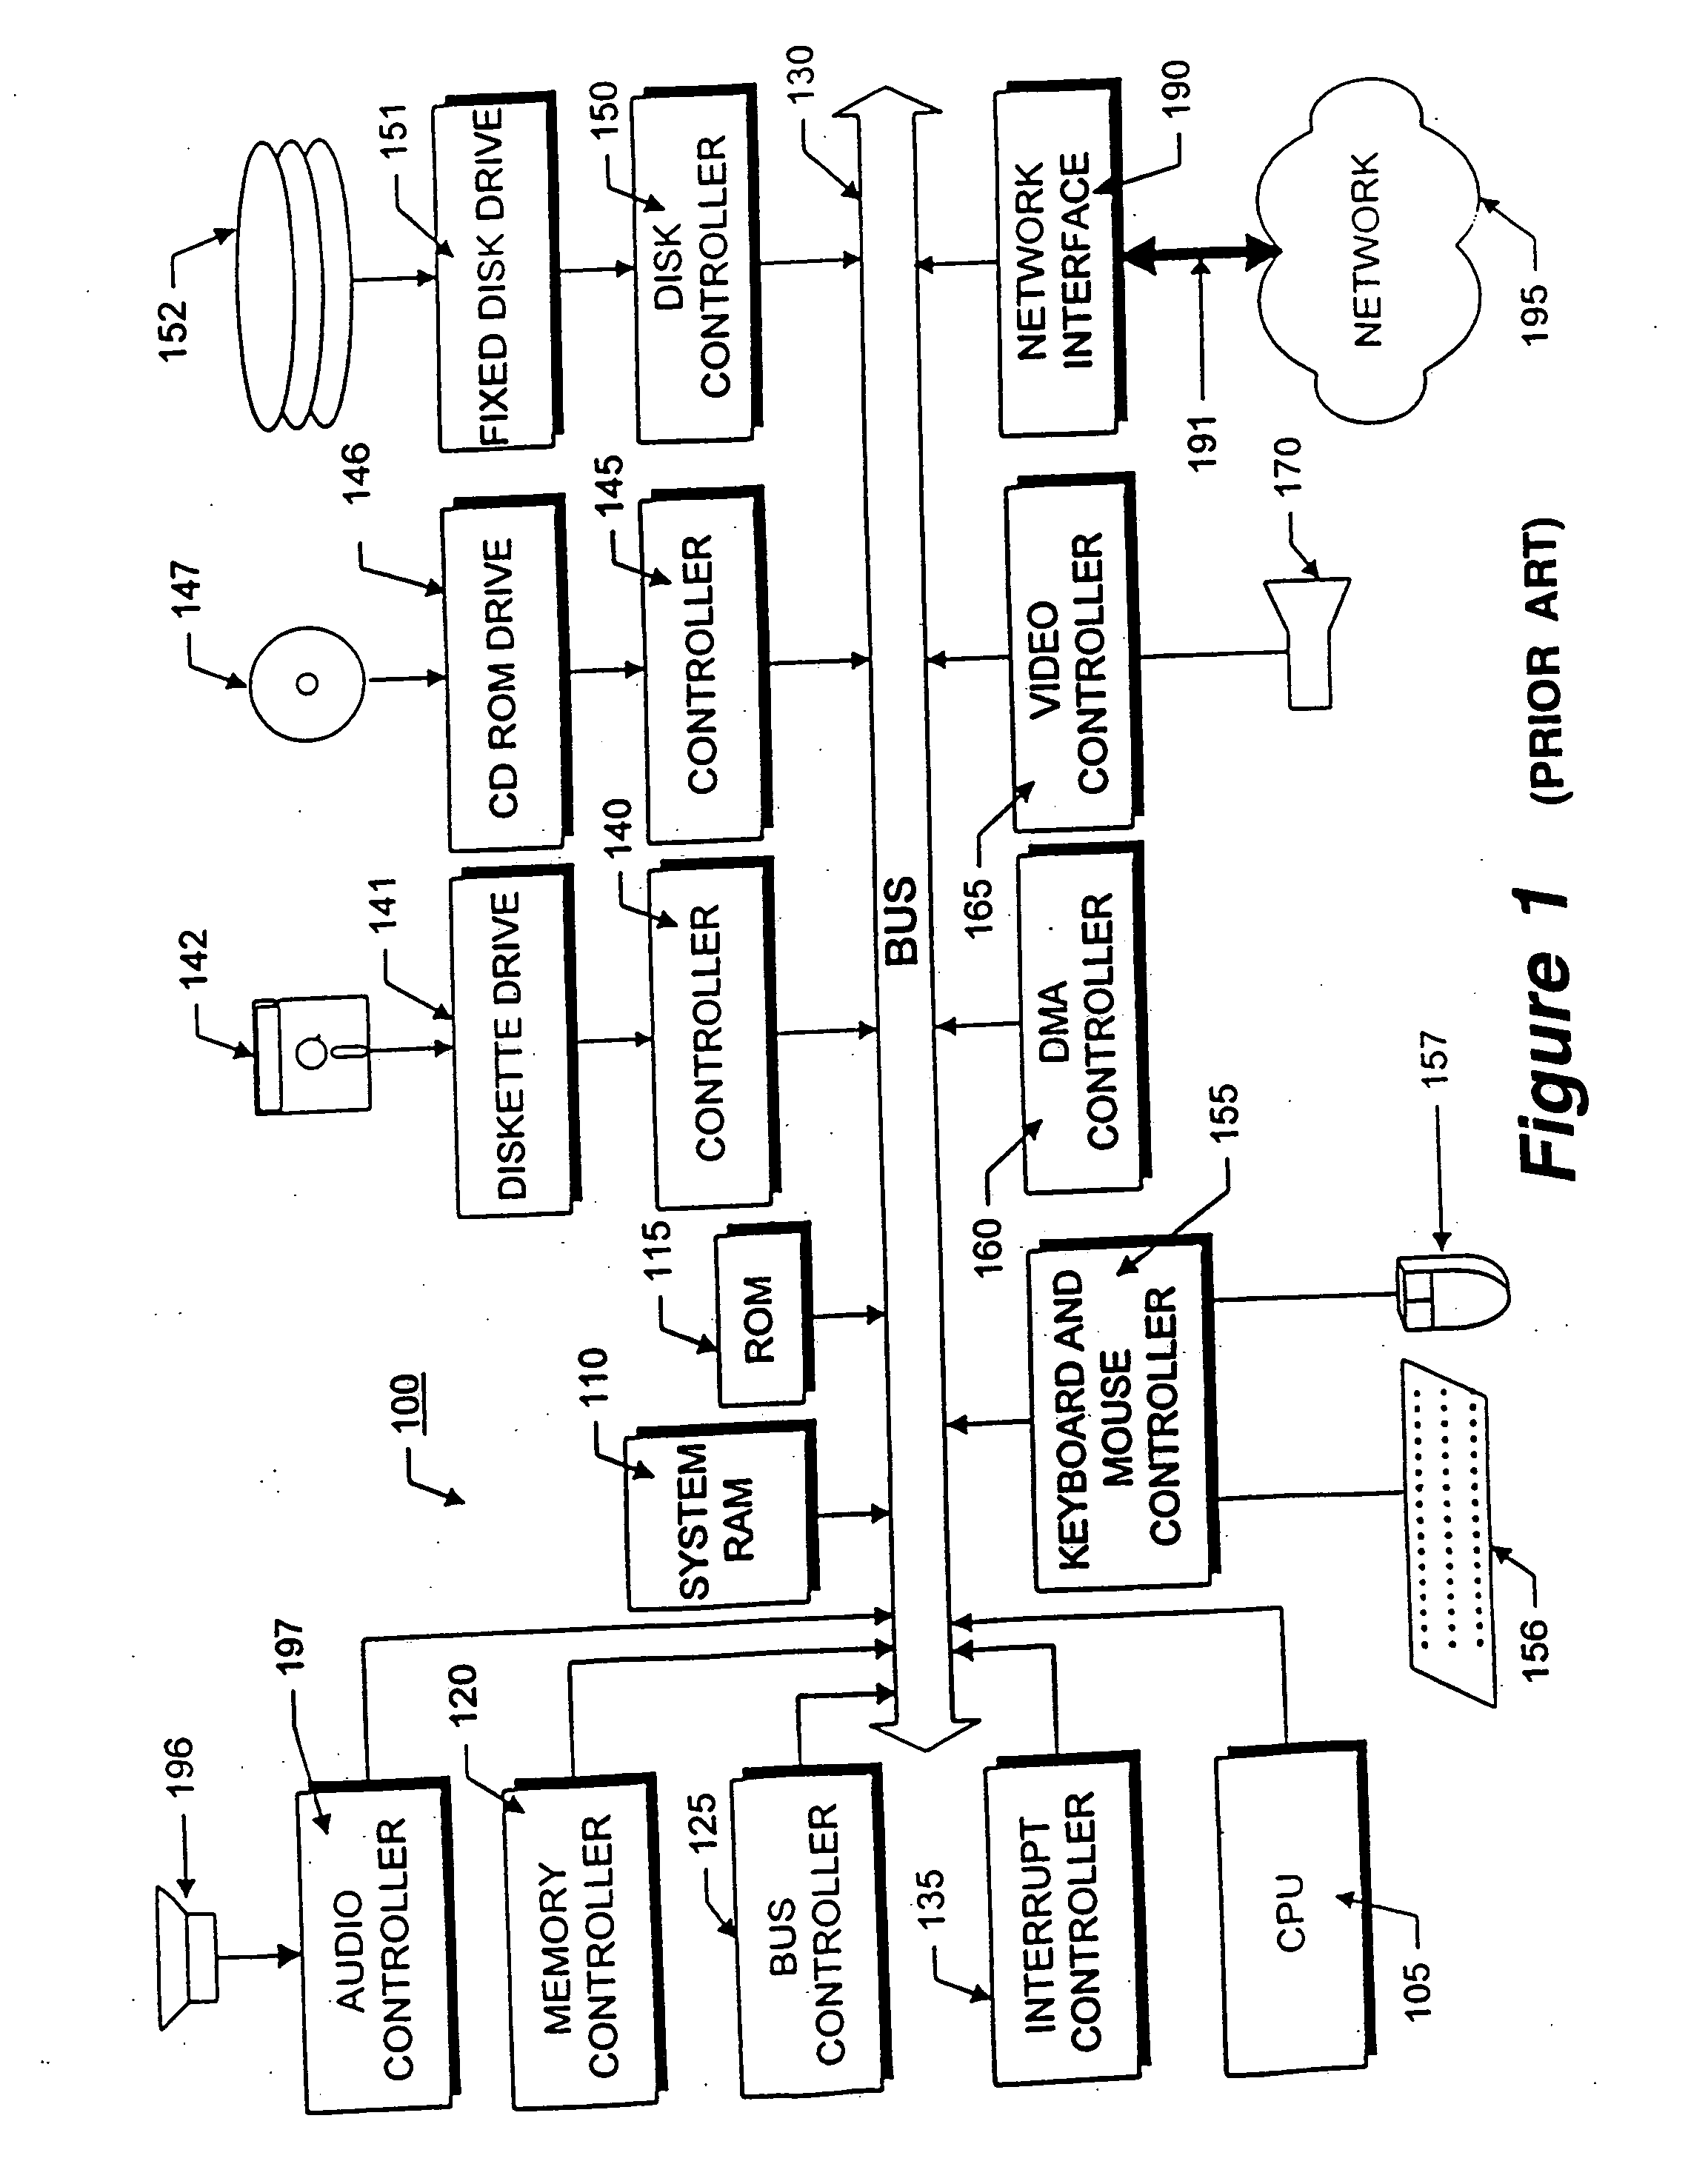 Method and apparatus for secure content delivery over broadband access networks